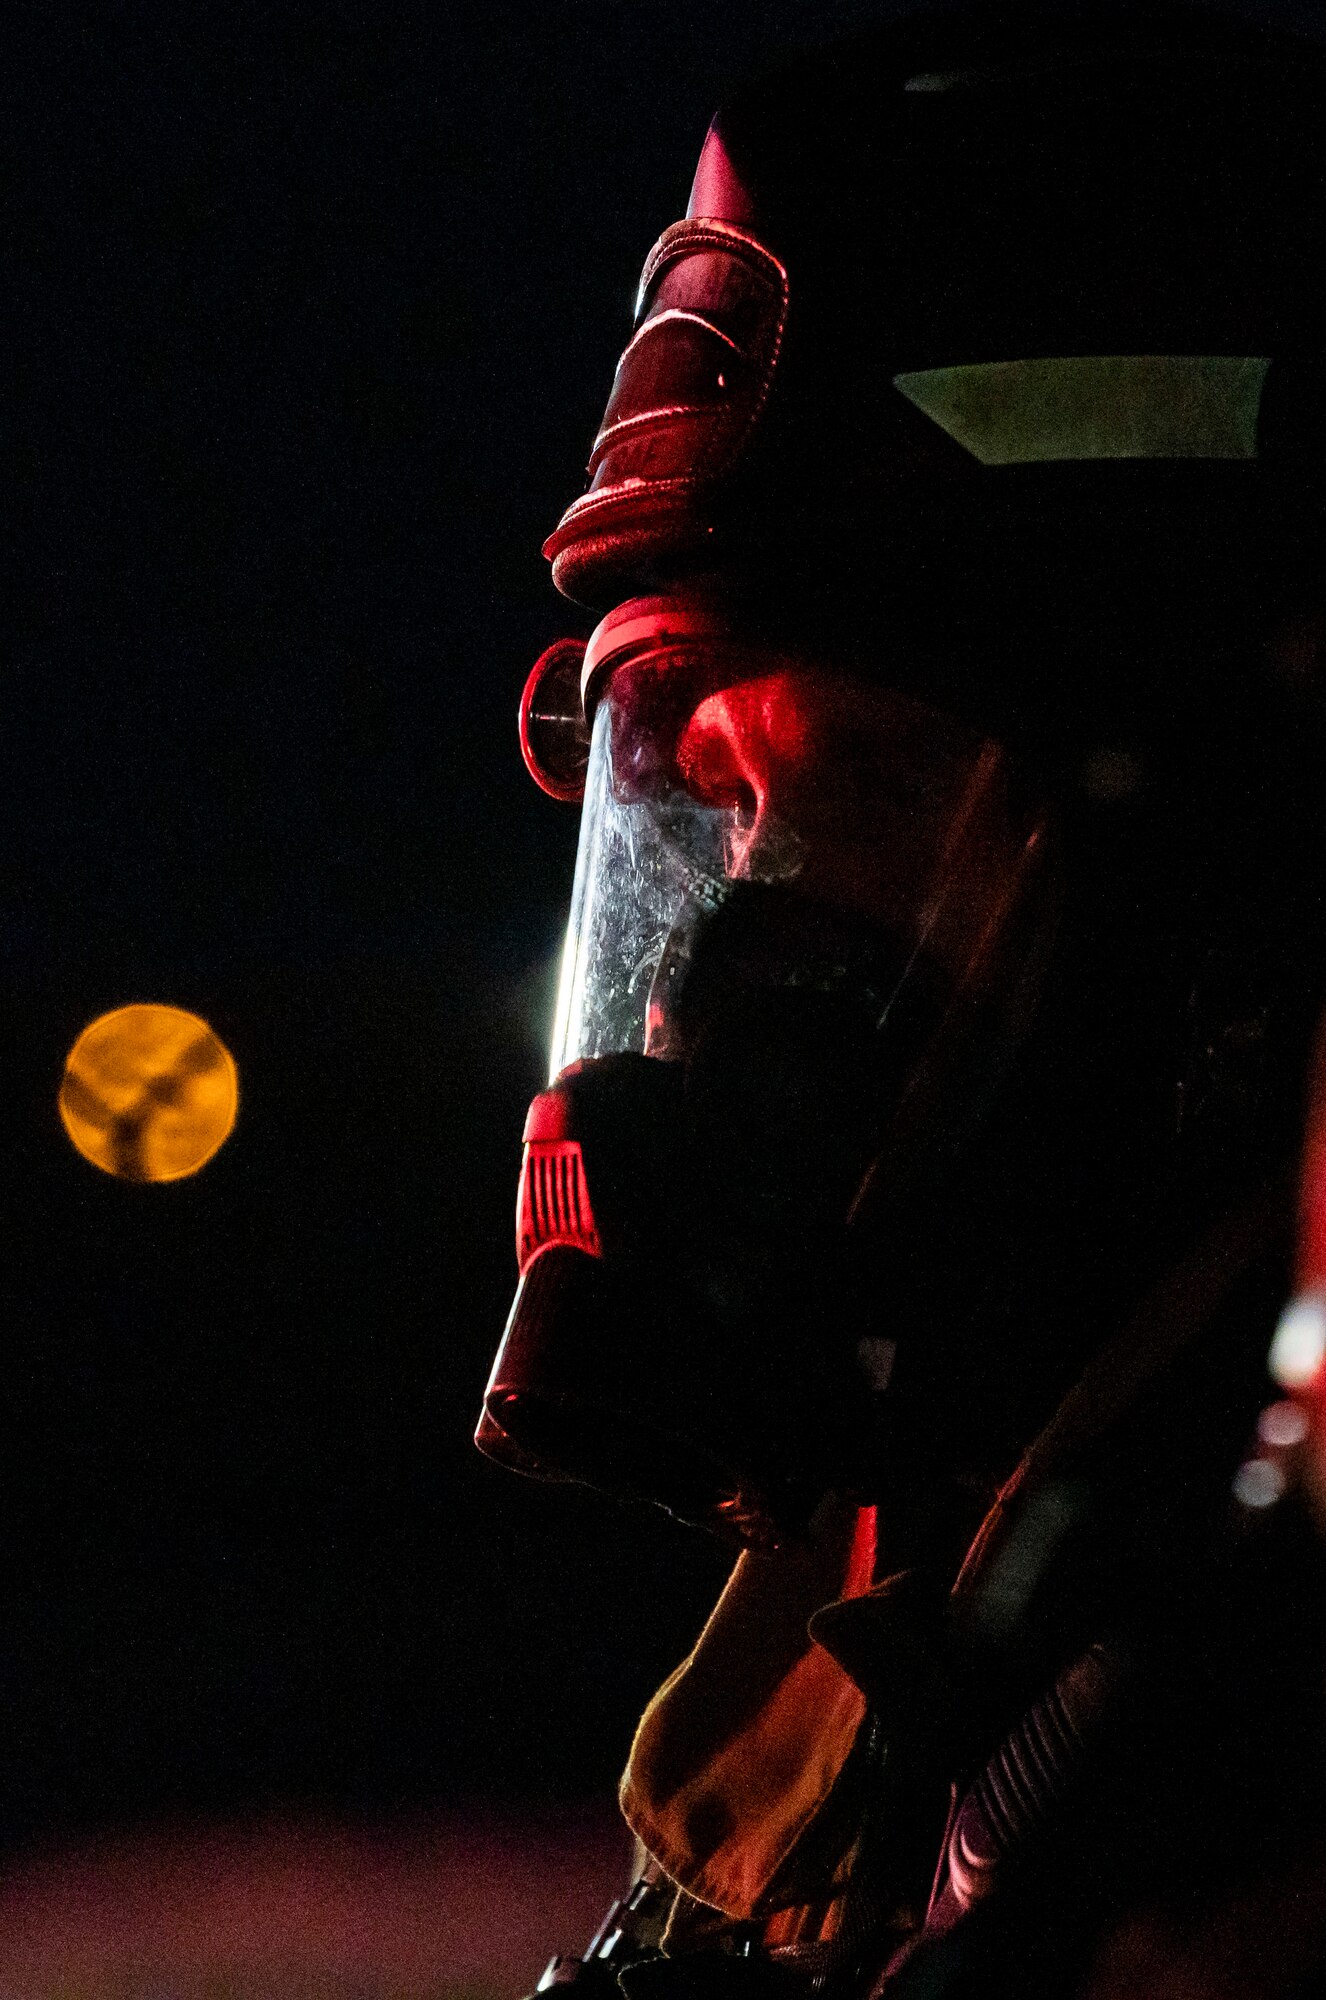 A firefighter from the 436th Civil Engineer Squadron watches a live-fire-burn exercise at night Sept. 28, 2020, on Dover Air Force Base, Delaware. Total Force and civilian fire companies in the surrounding community often partner with Dover AFB to complete annual training requirements. (U.S. Air Force photo by Senior Airman Christopher Quail)